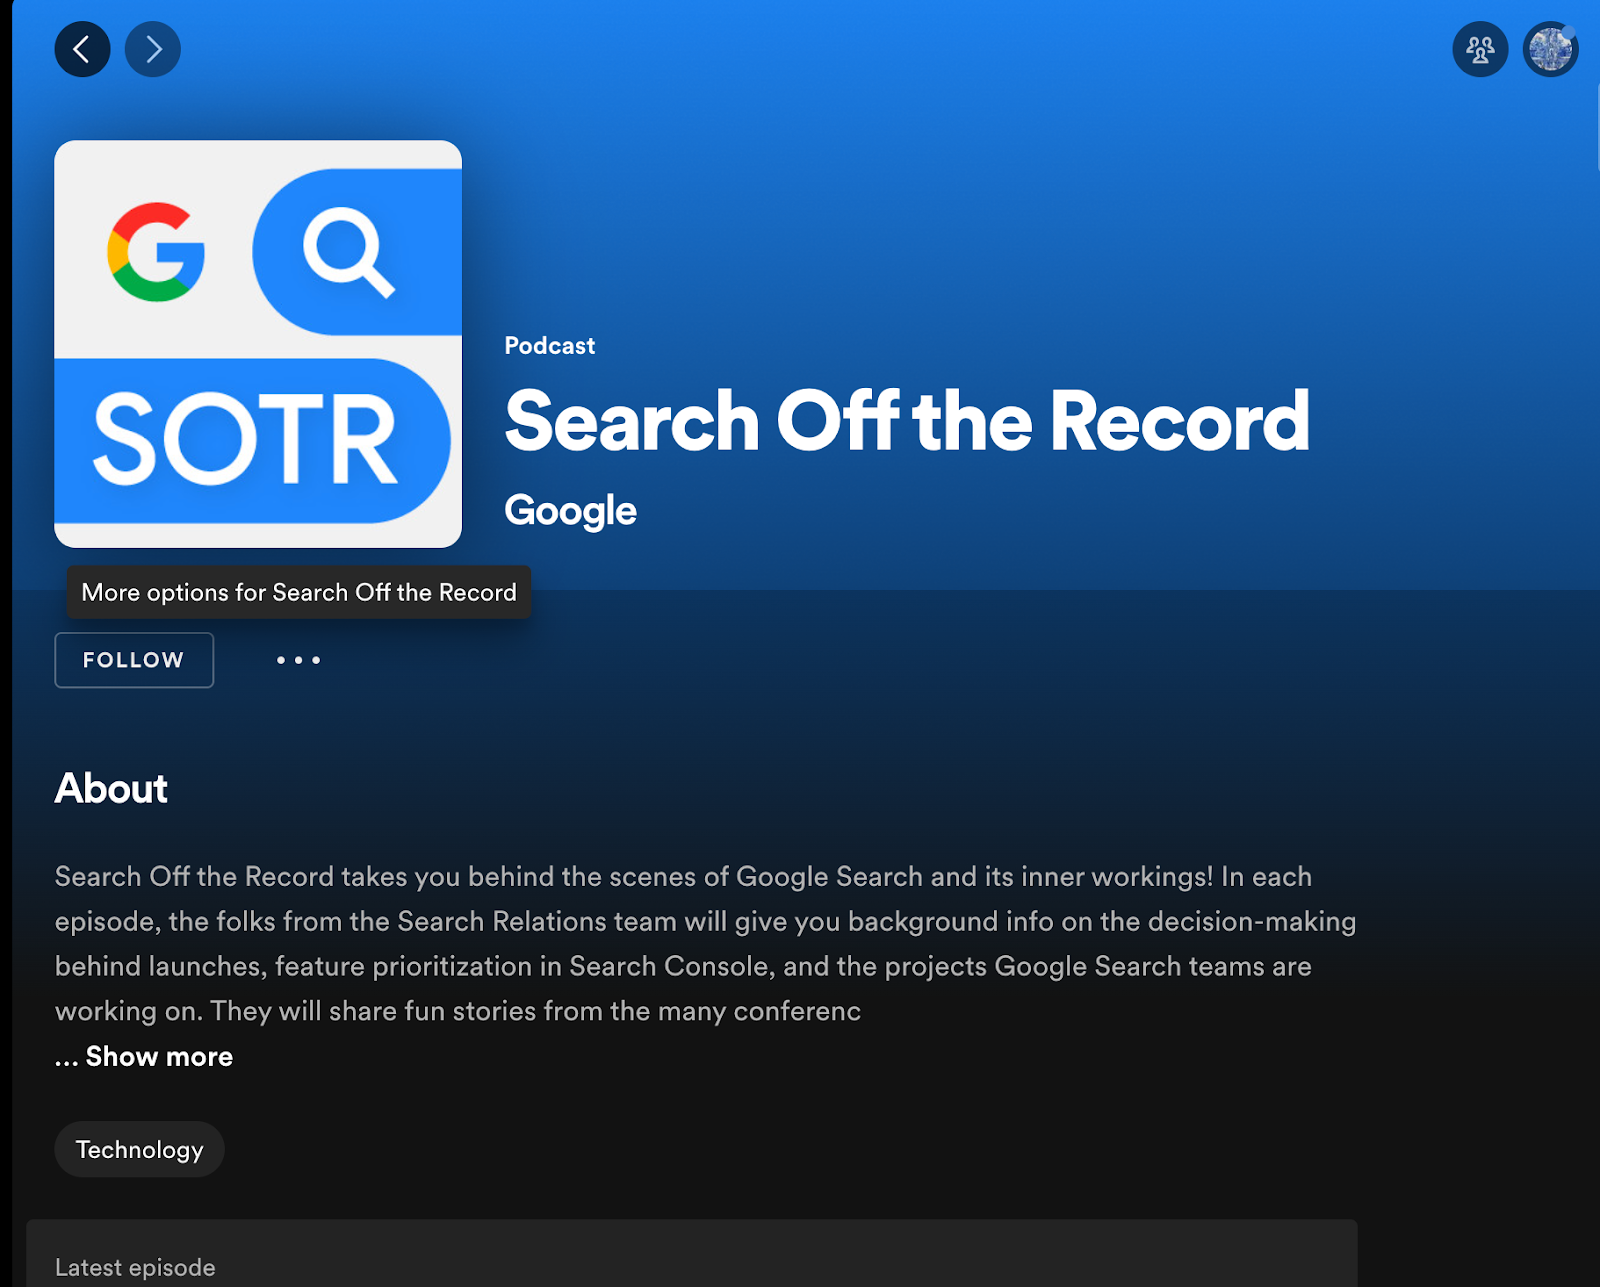 Search off the Record